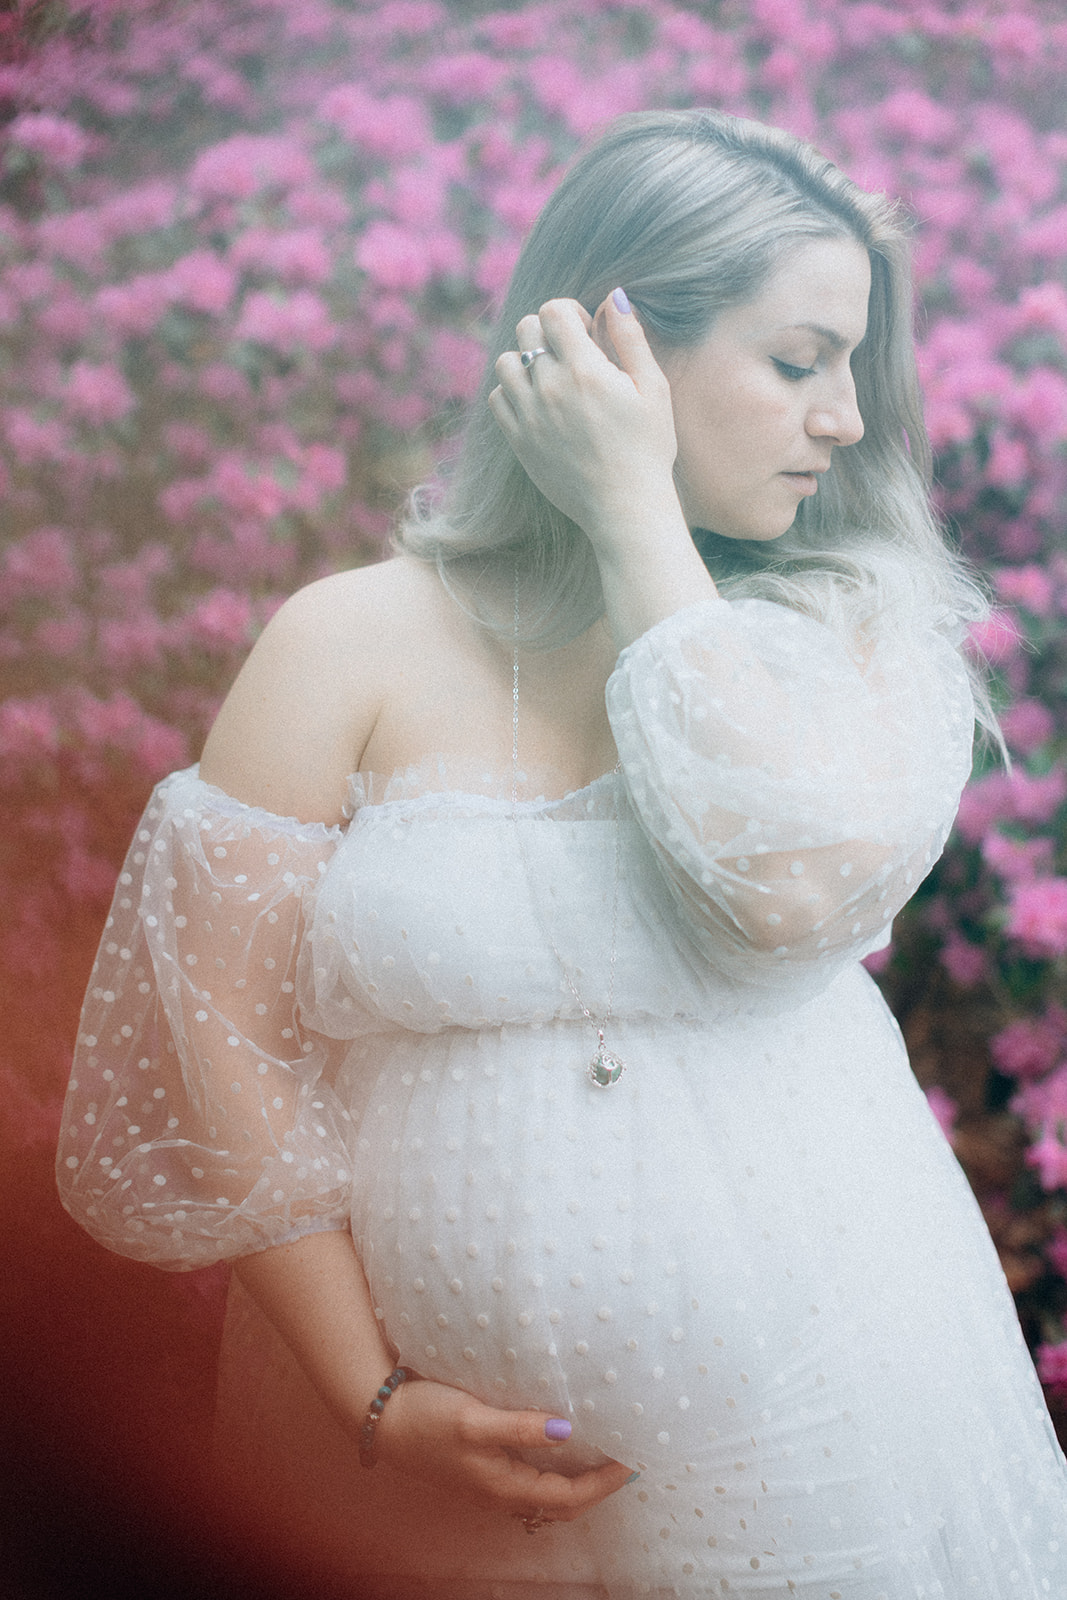 Pregnant Anais in front of pink flowers bush holding her baby bump and adjusting her hair